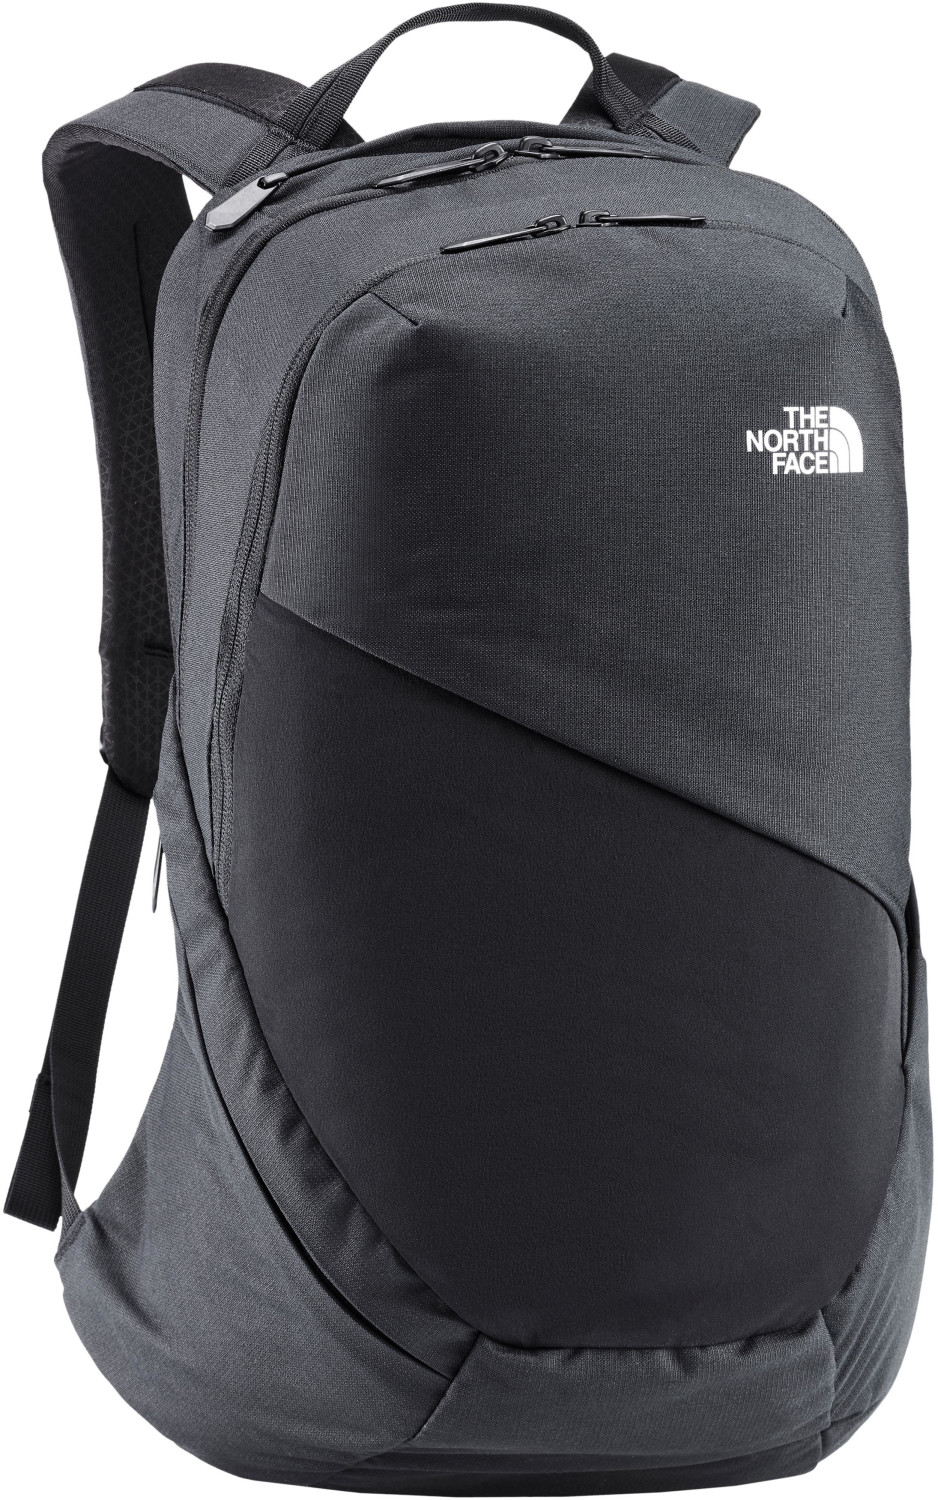 Buy The North Face Isabella tnf black heather/tnf white from £48.70